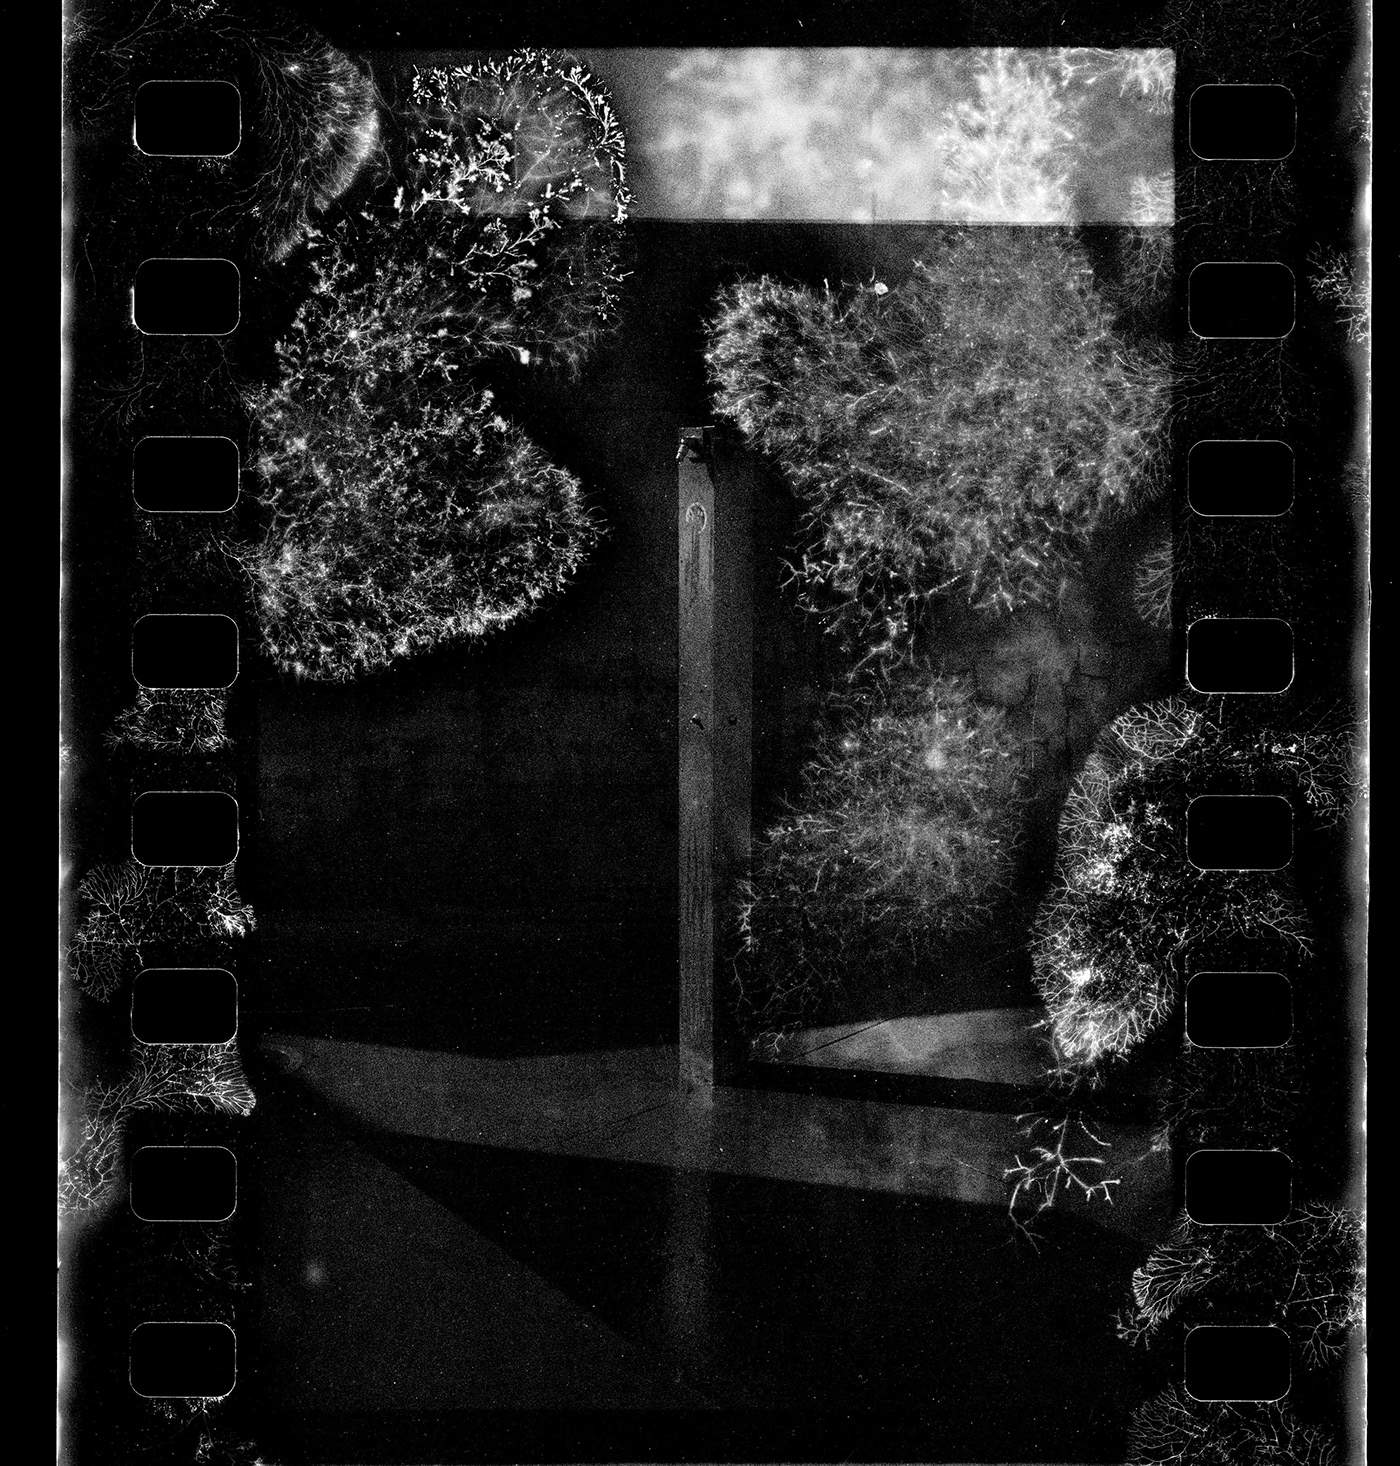 35mm fomapan 100 funghi interference mold noise superposition Travel